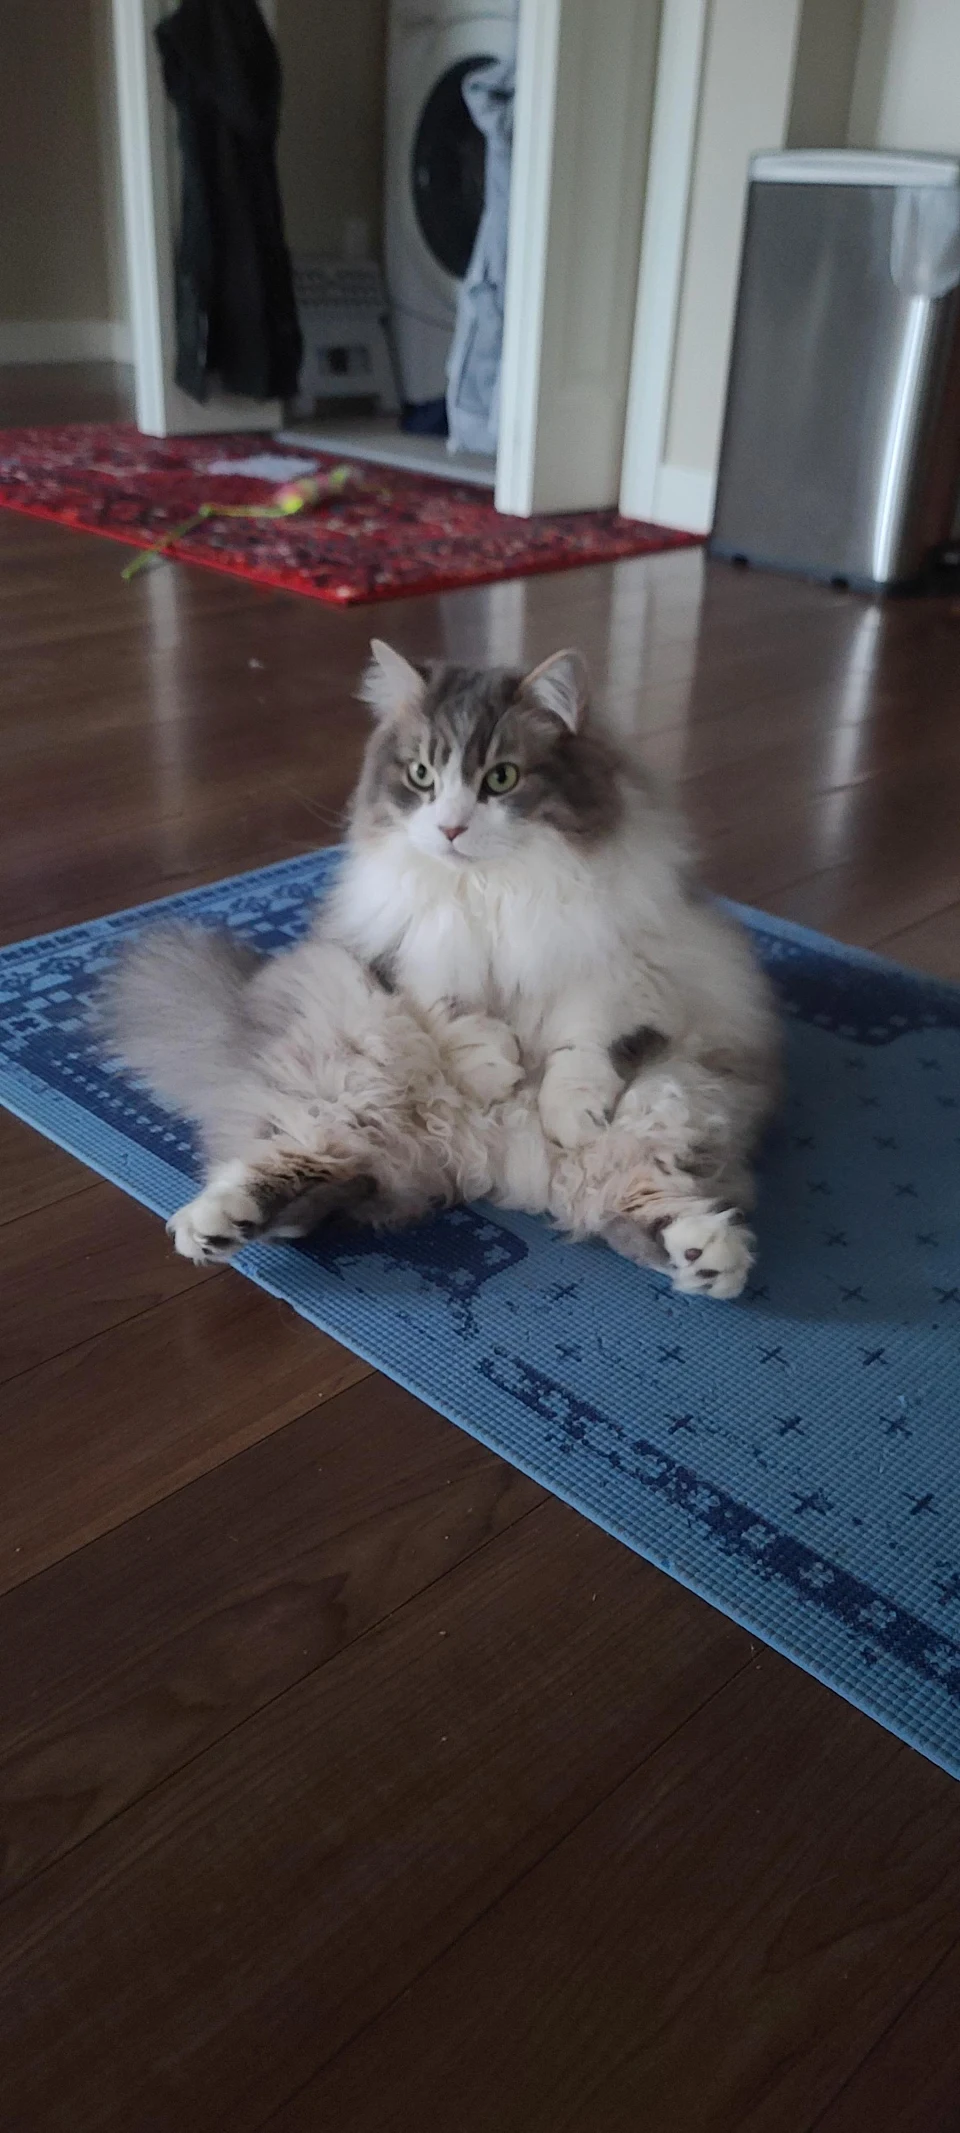 How my girlfriend's cat that that never stops meowing sits. Is this a normal cat thing?